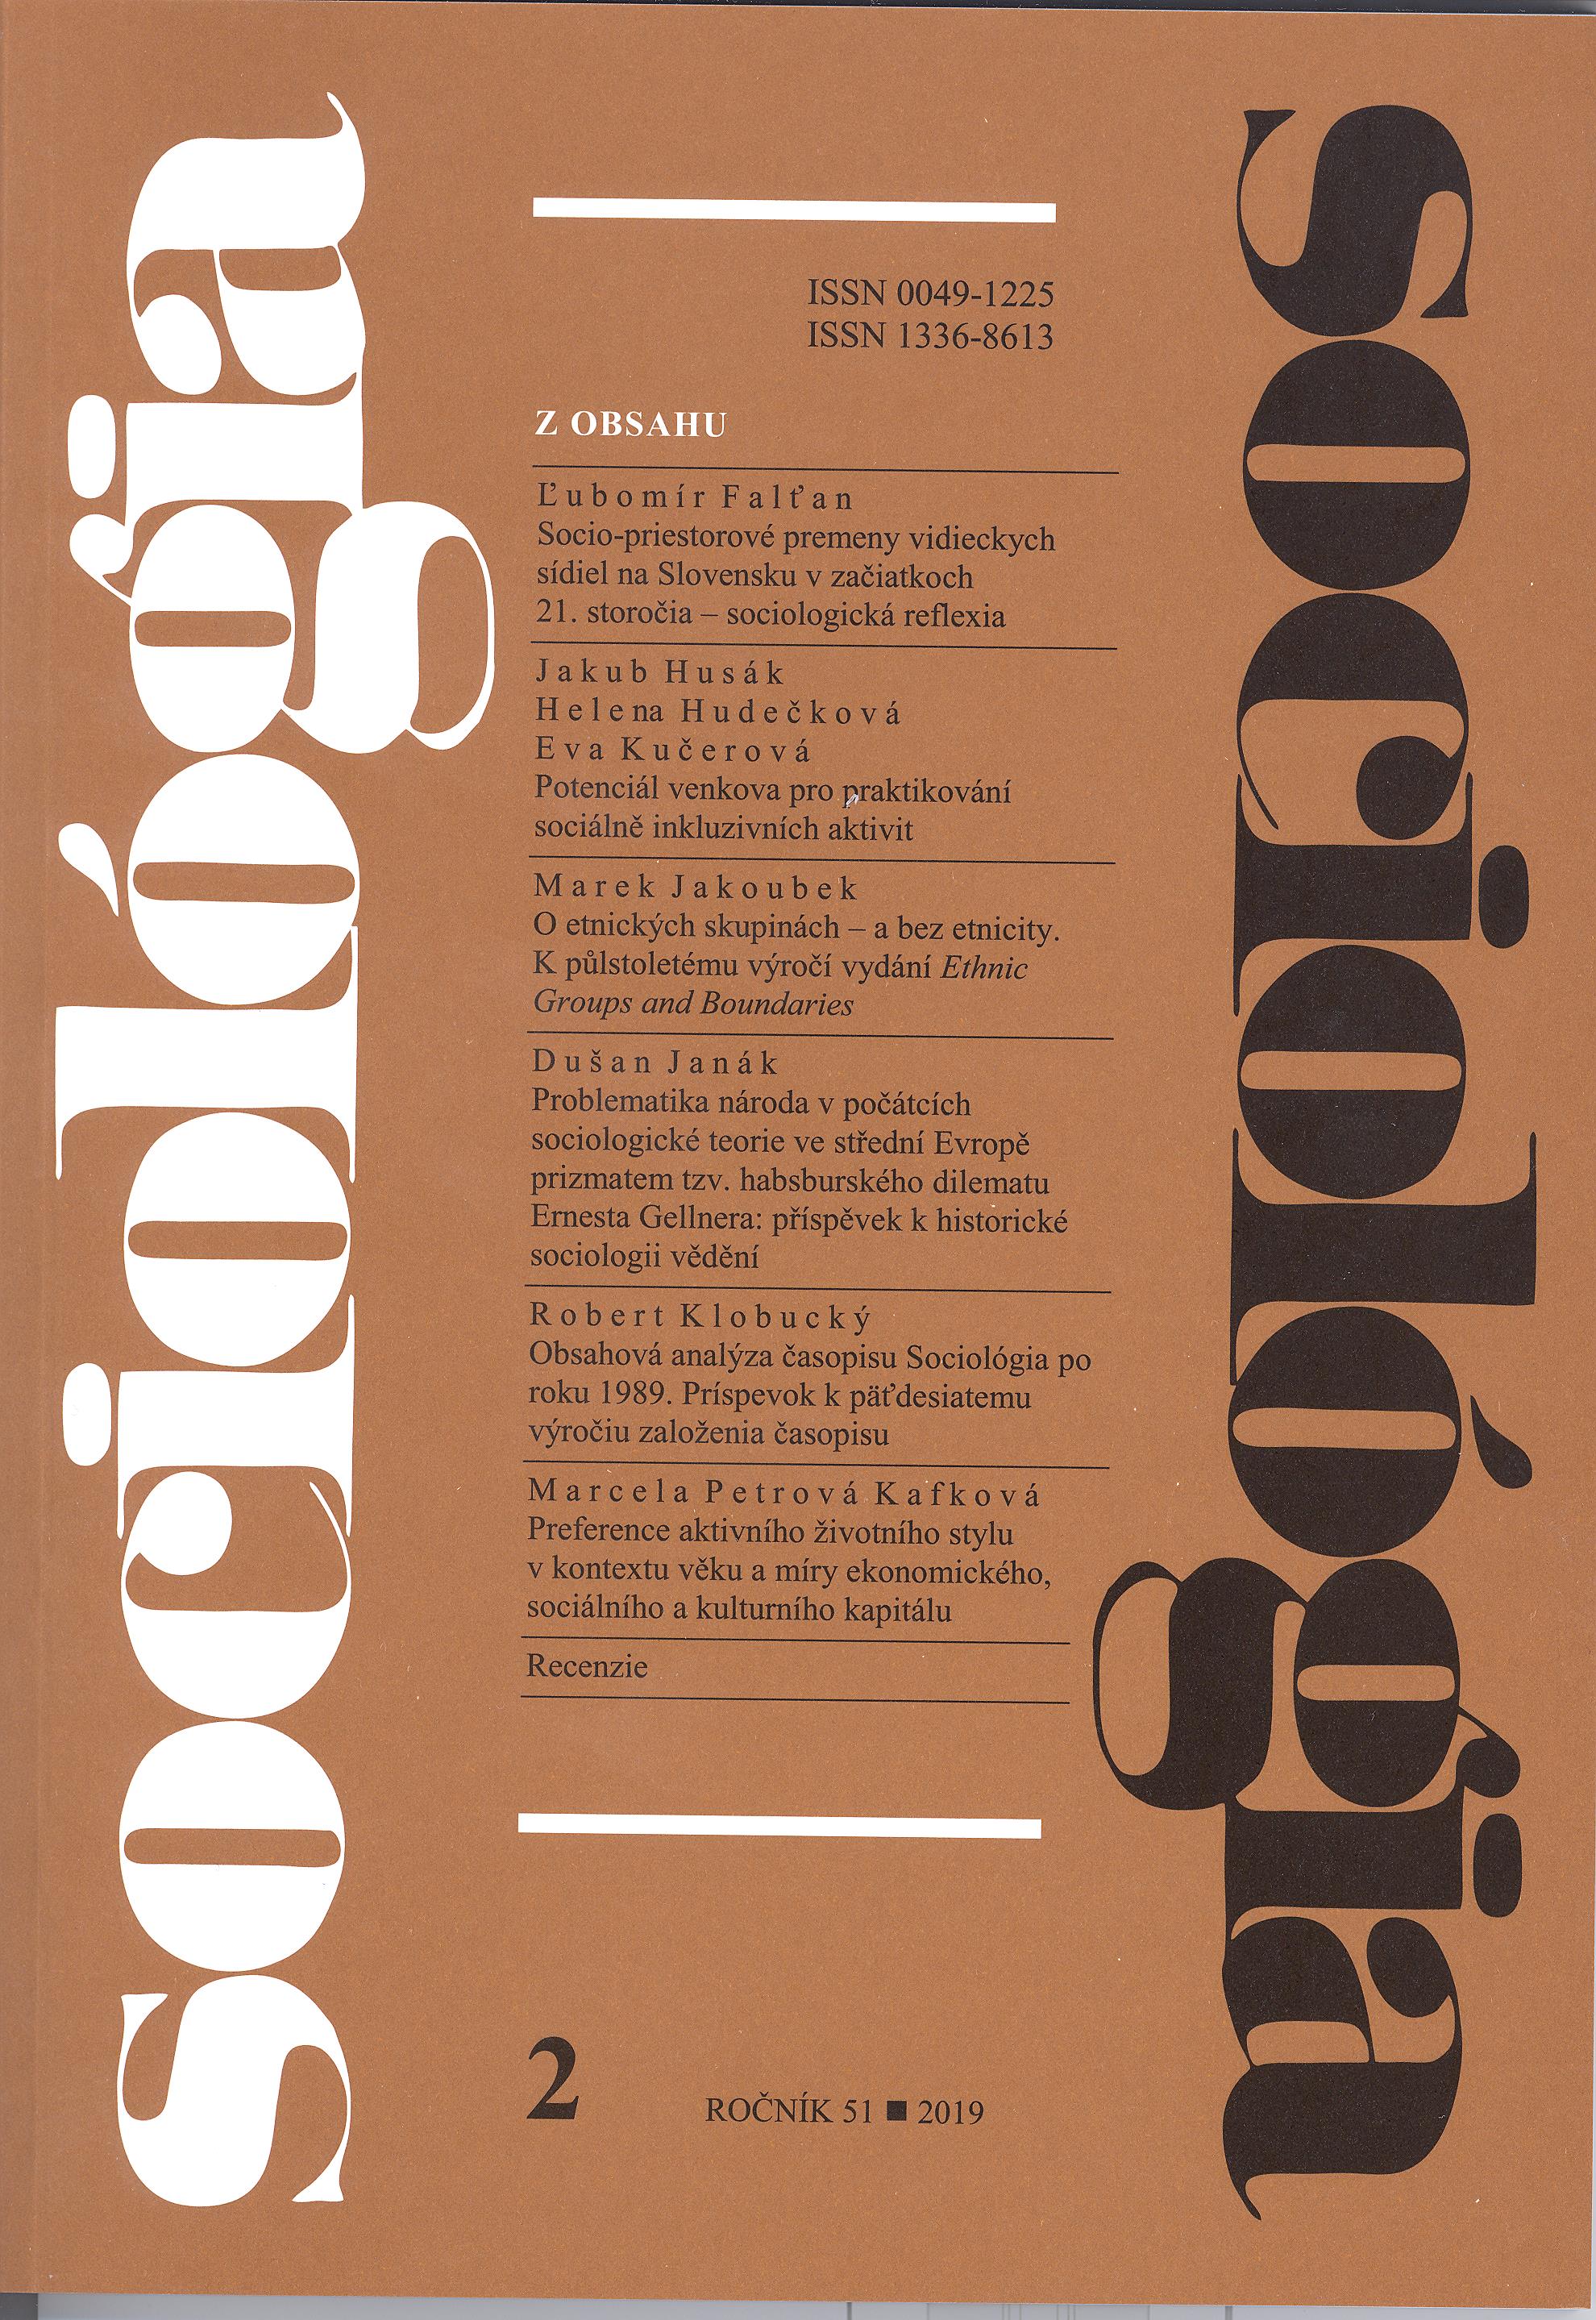 A Content Analysis of Sociológia/Slovak Sociological Review since 1989: A Commemoration of the 50th Anniversary of the Journal Cover Image